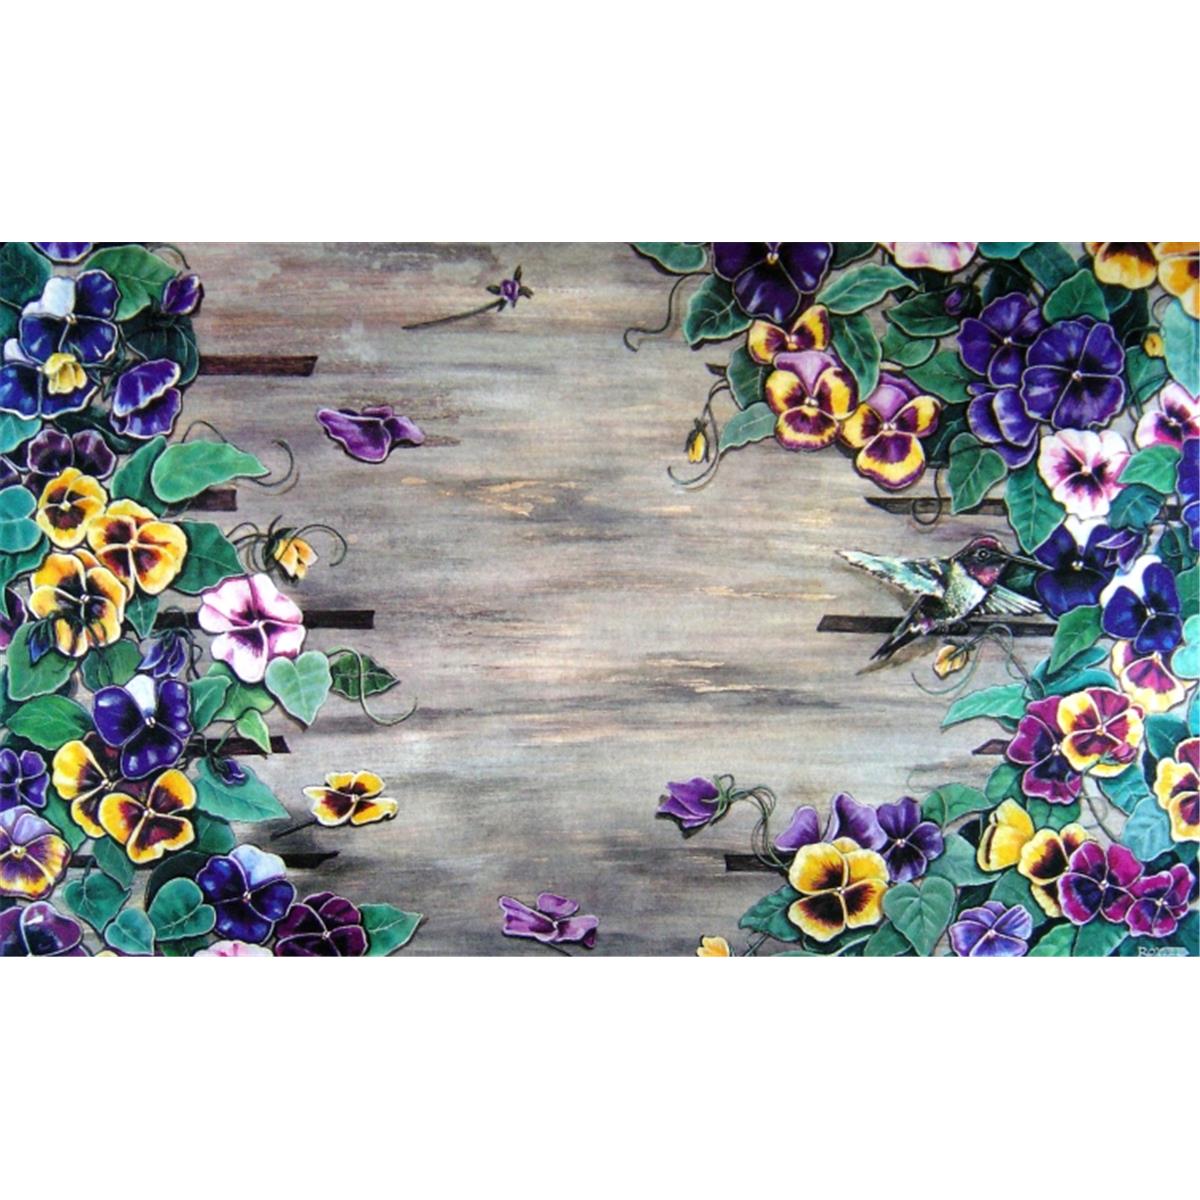 Cpr046 Weatherwood Pansy 18 X 30 In. Doormat Rug - Blue, Gold & Yellow, Yellow